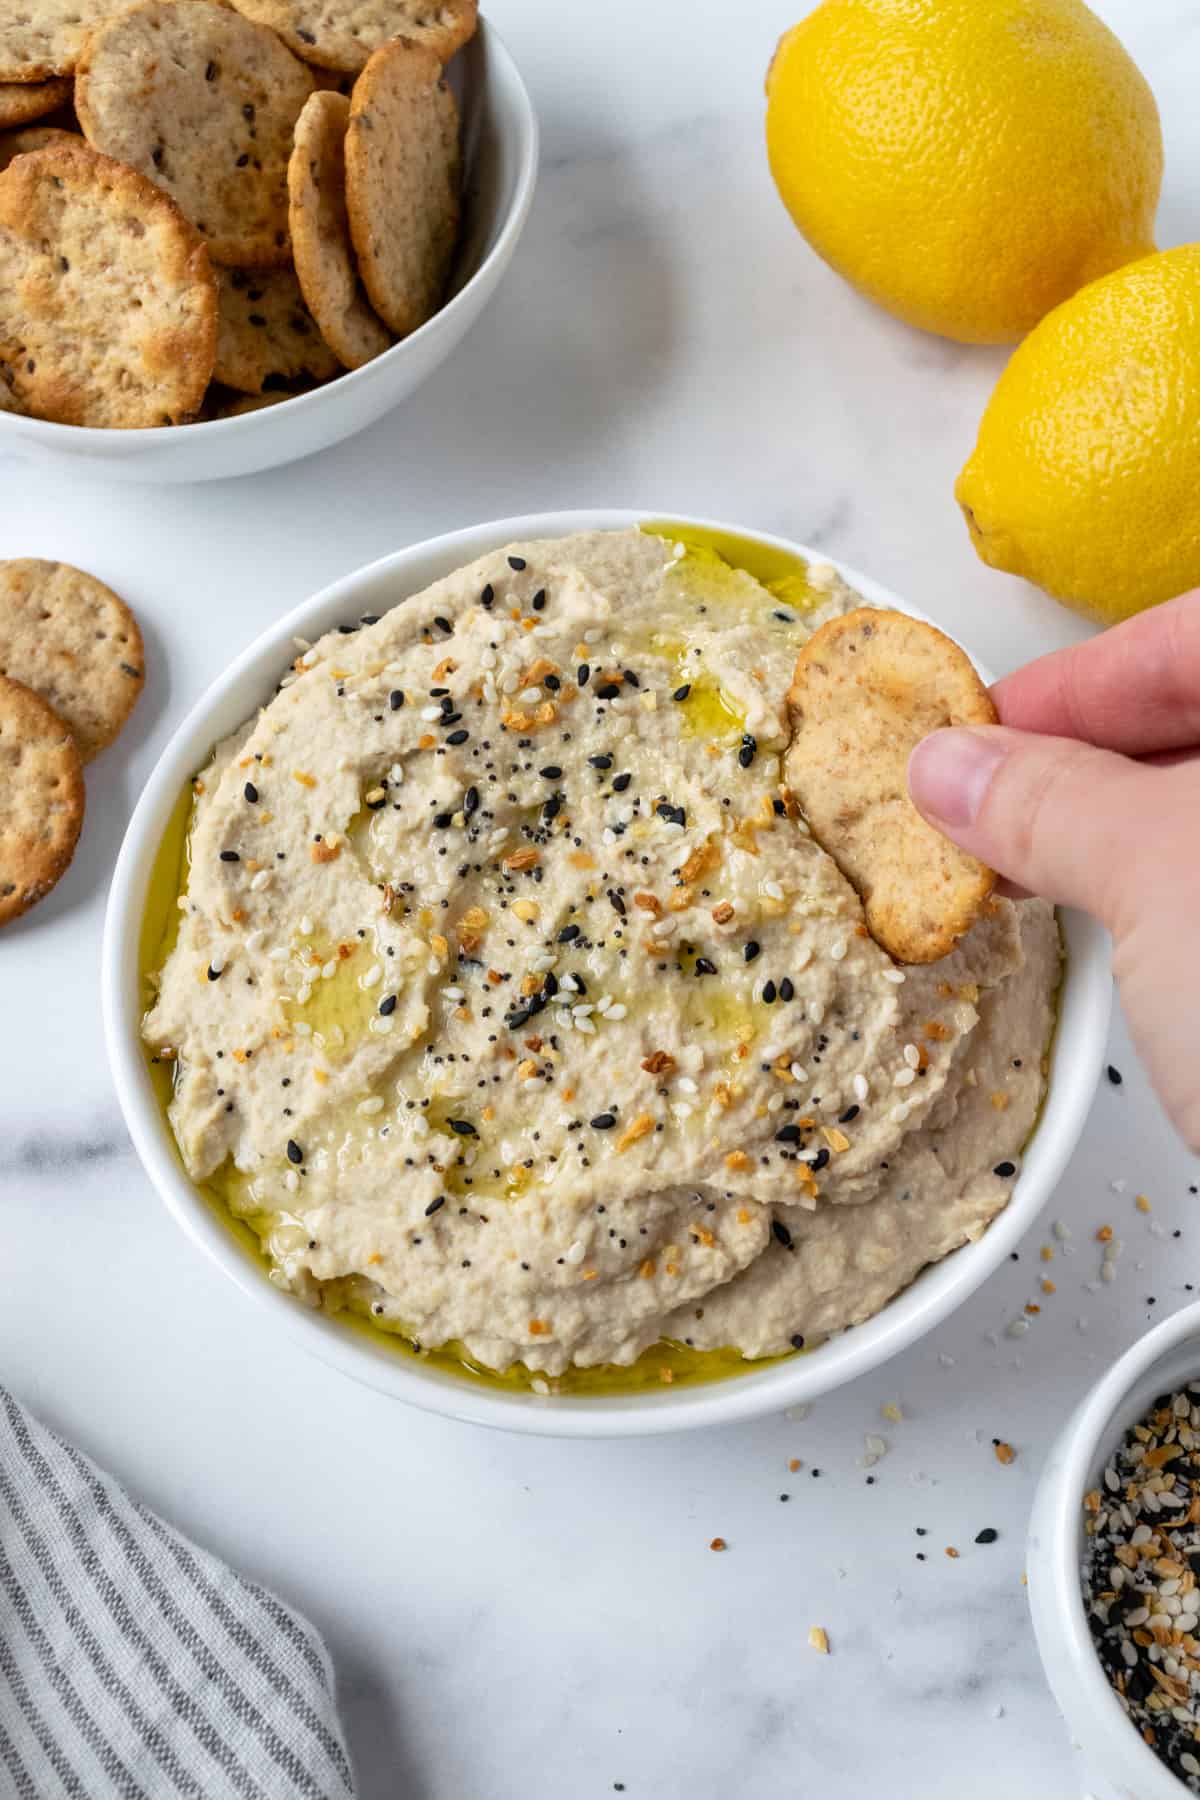 Everything Bagel Hummus with a hand dipping a cracker in it.